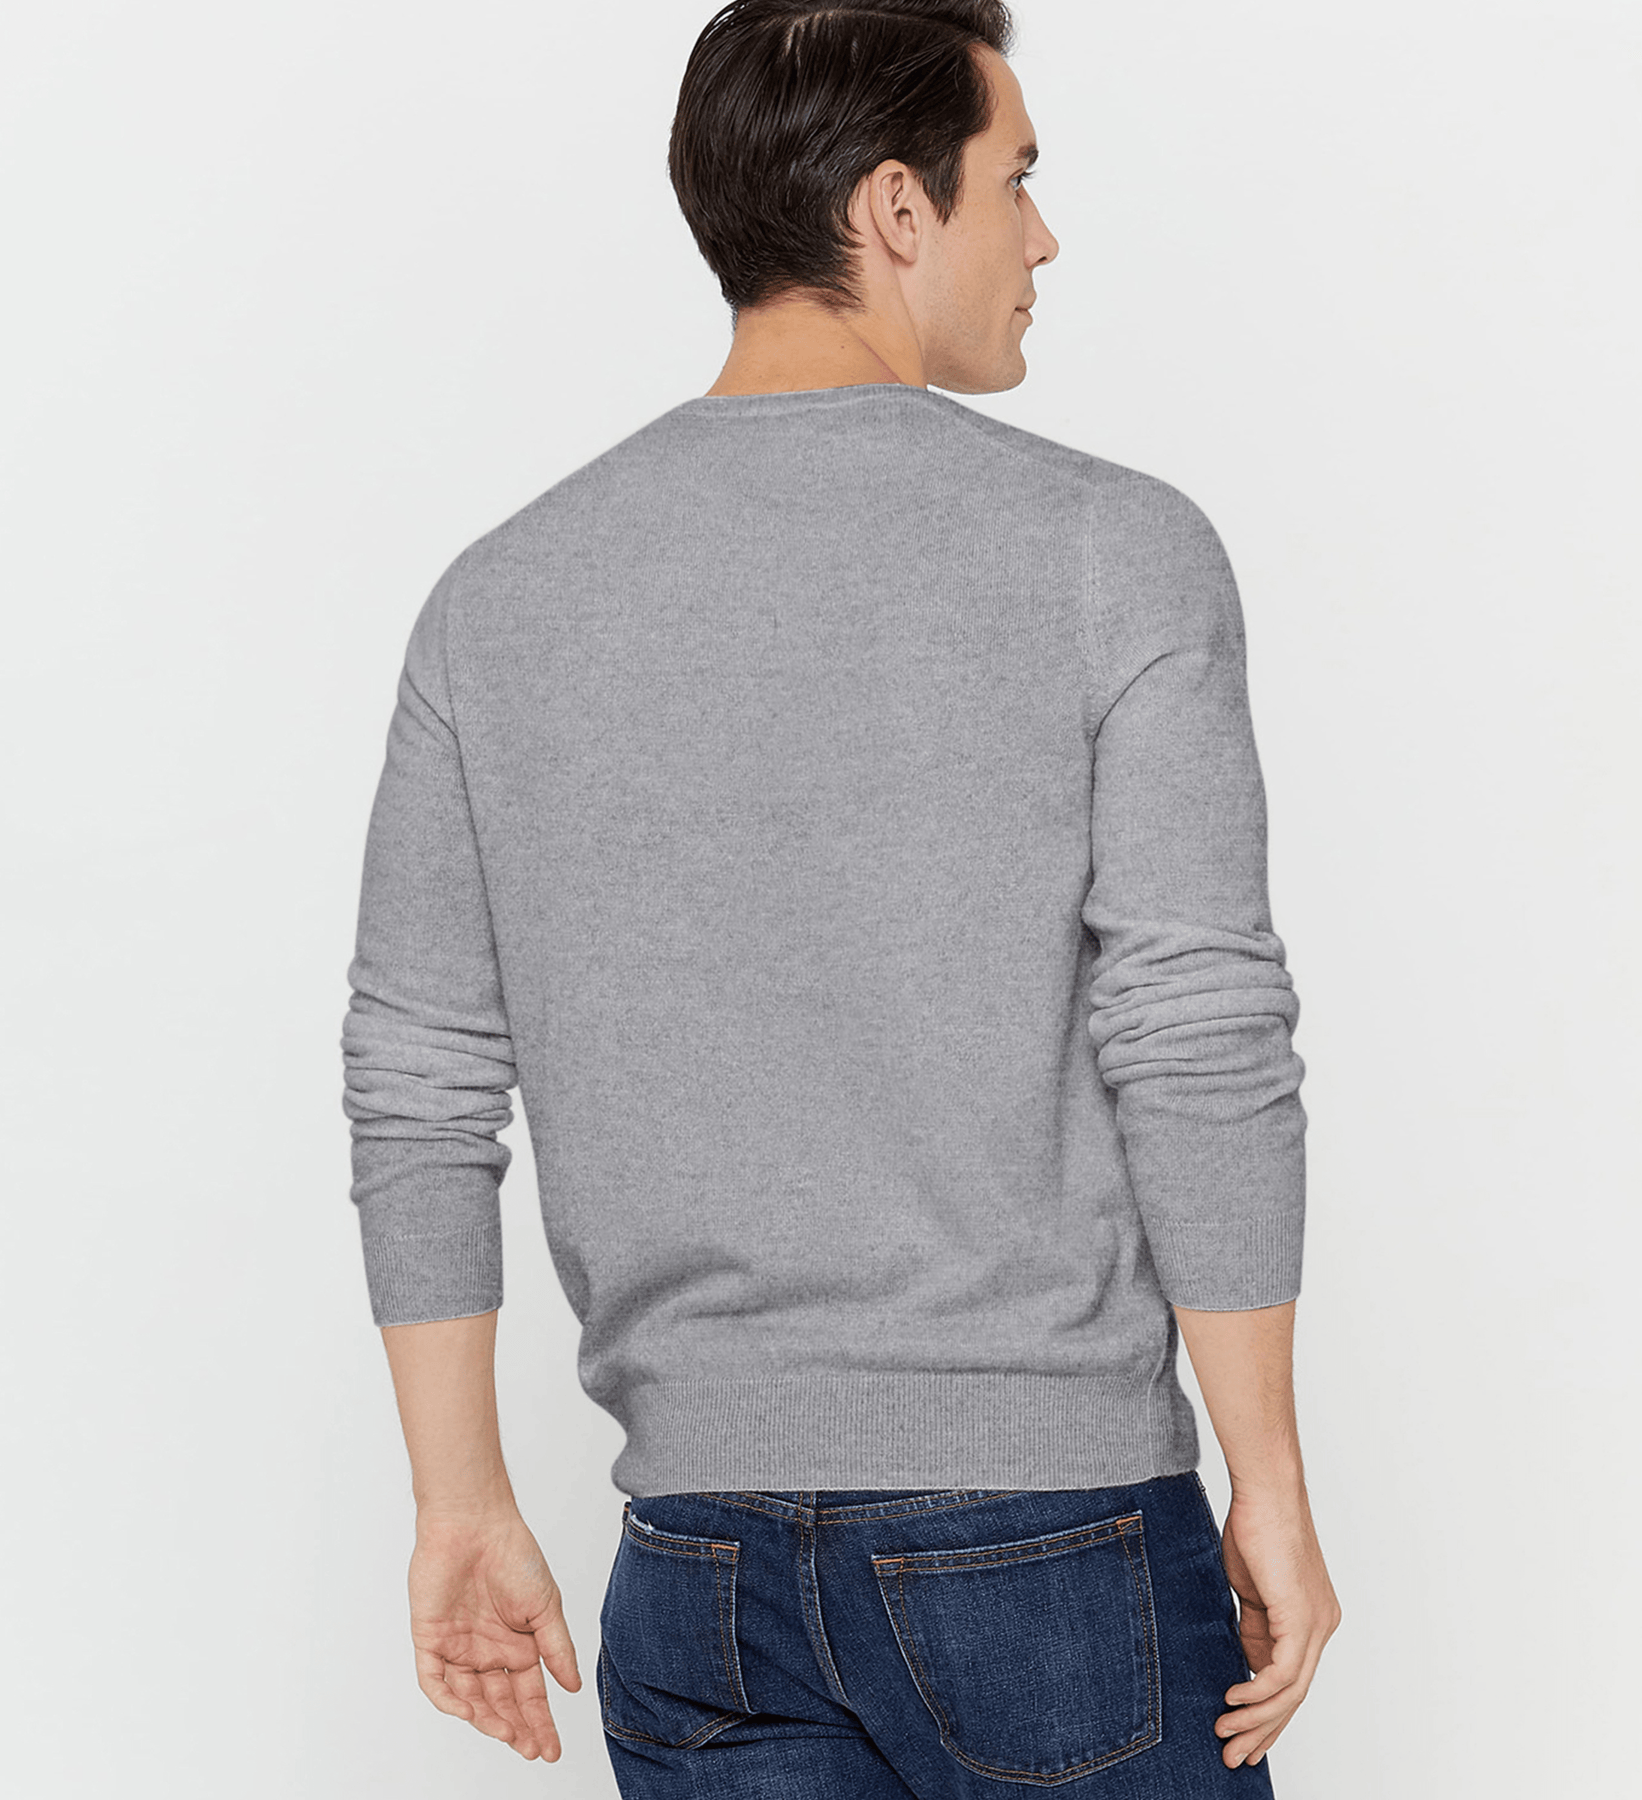 The V-Neck Basic Sweater – State Cashmere